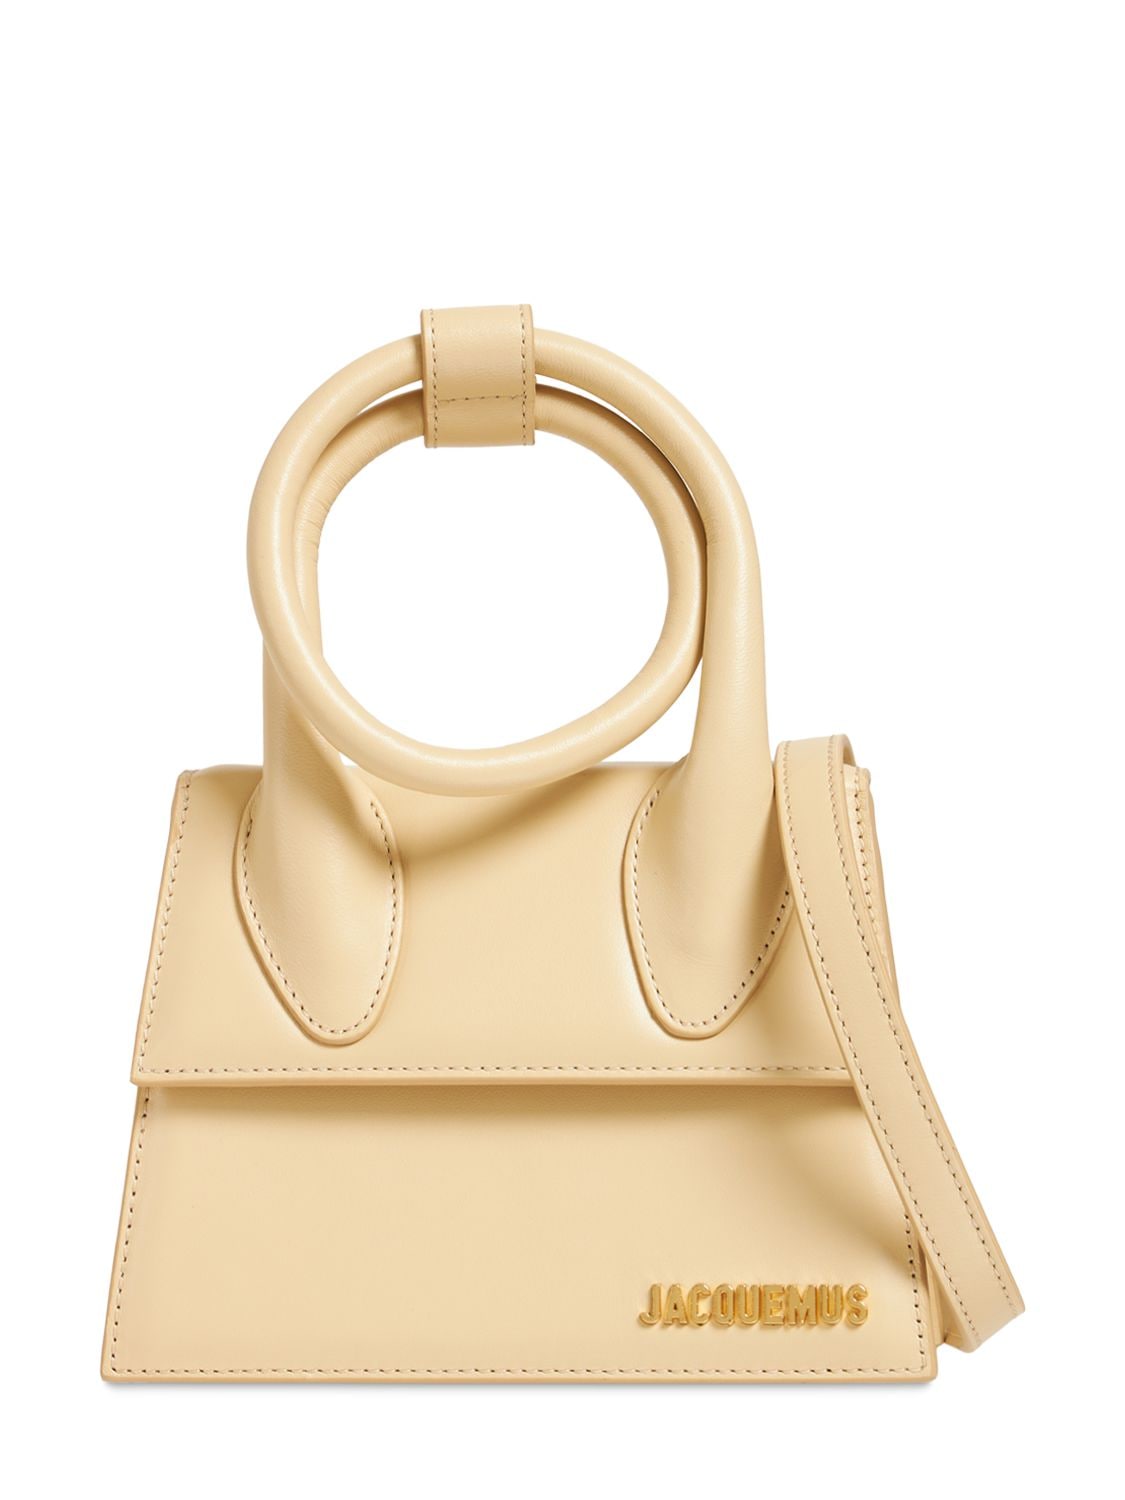 Jacquemus Le Chiquito Noeud Leather Shoulder Bag In Beige | ModeSens